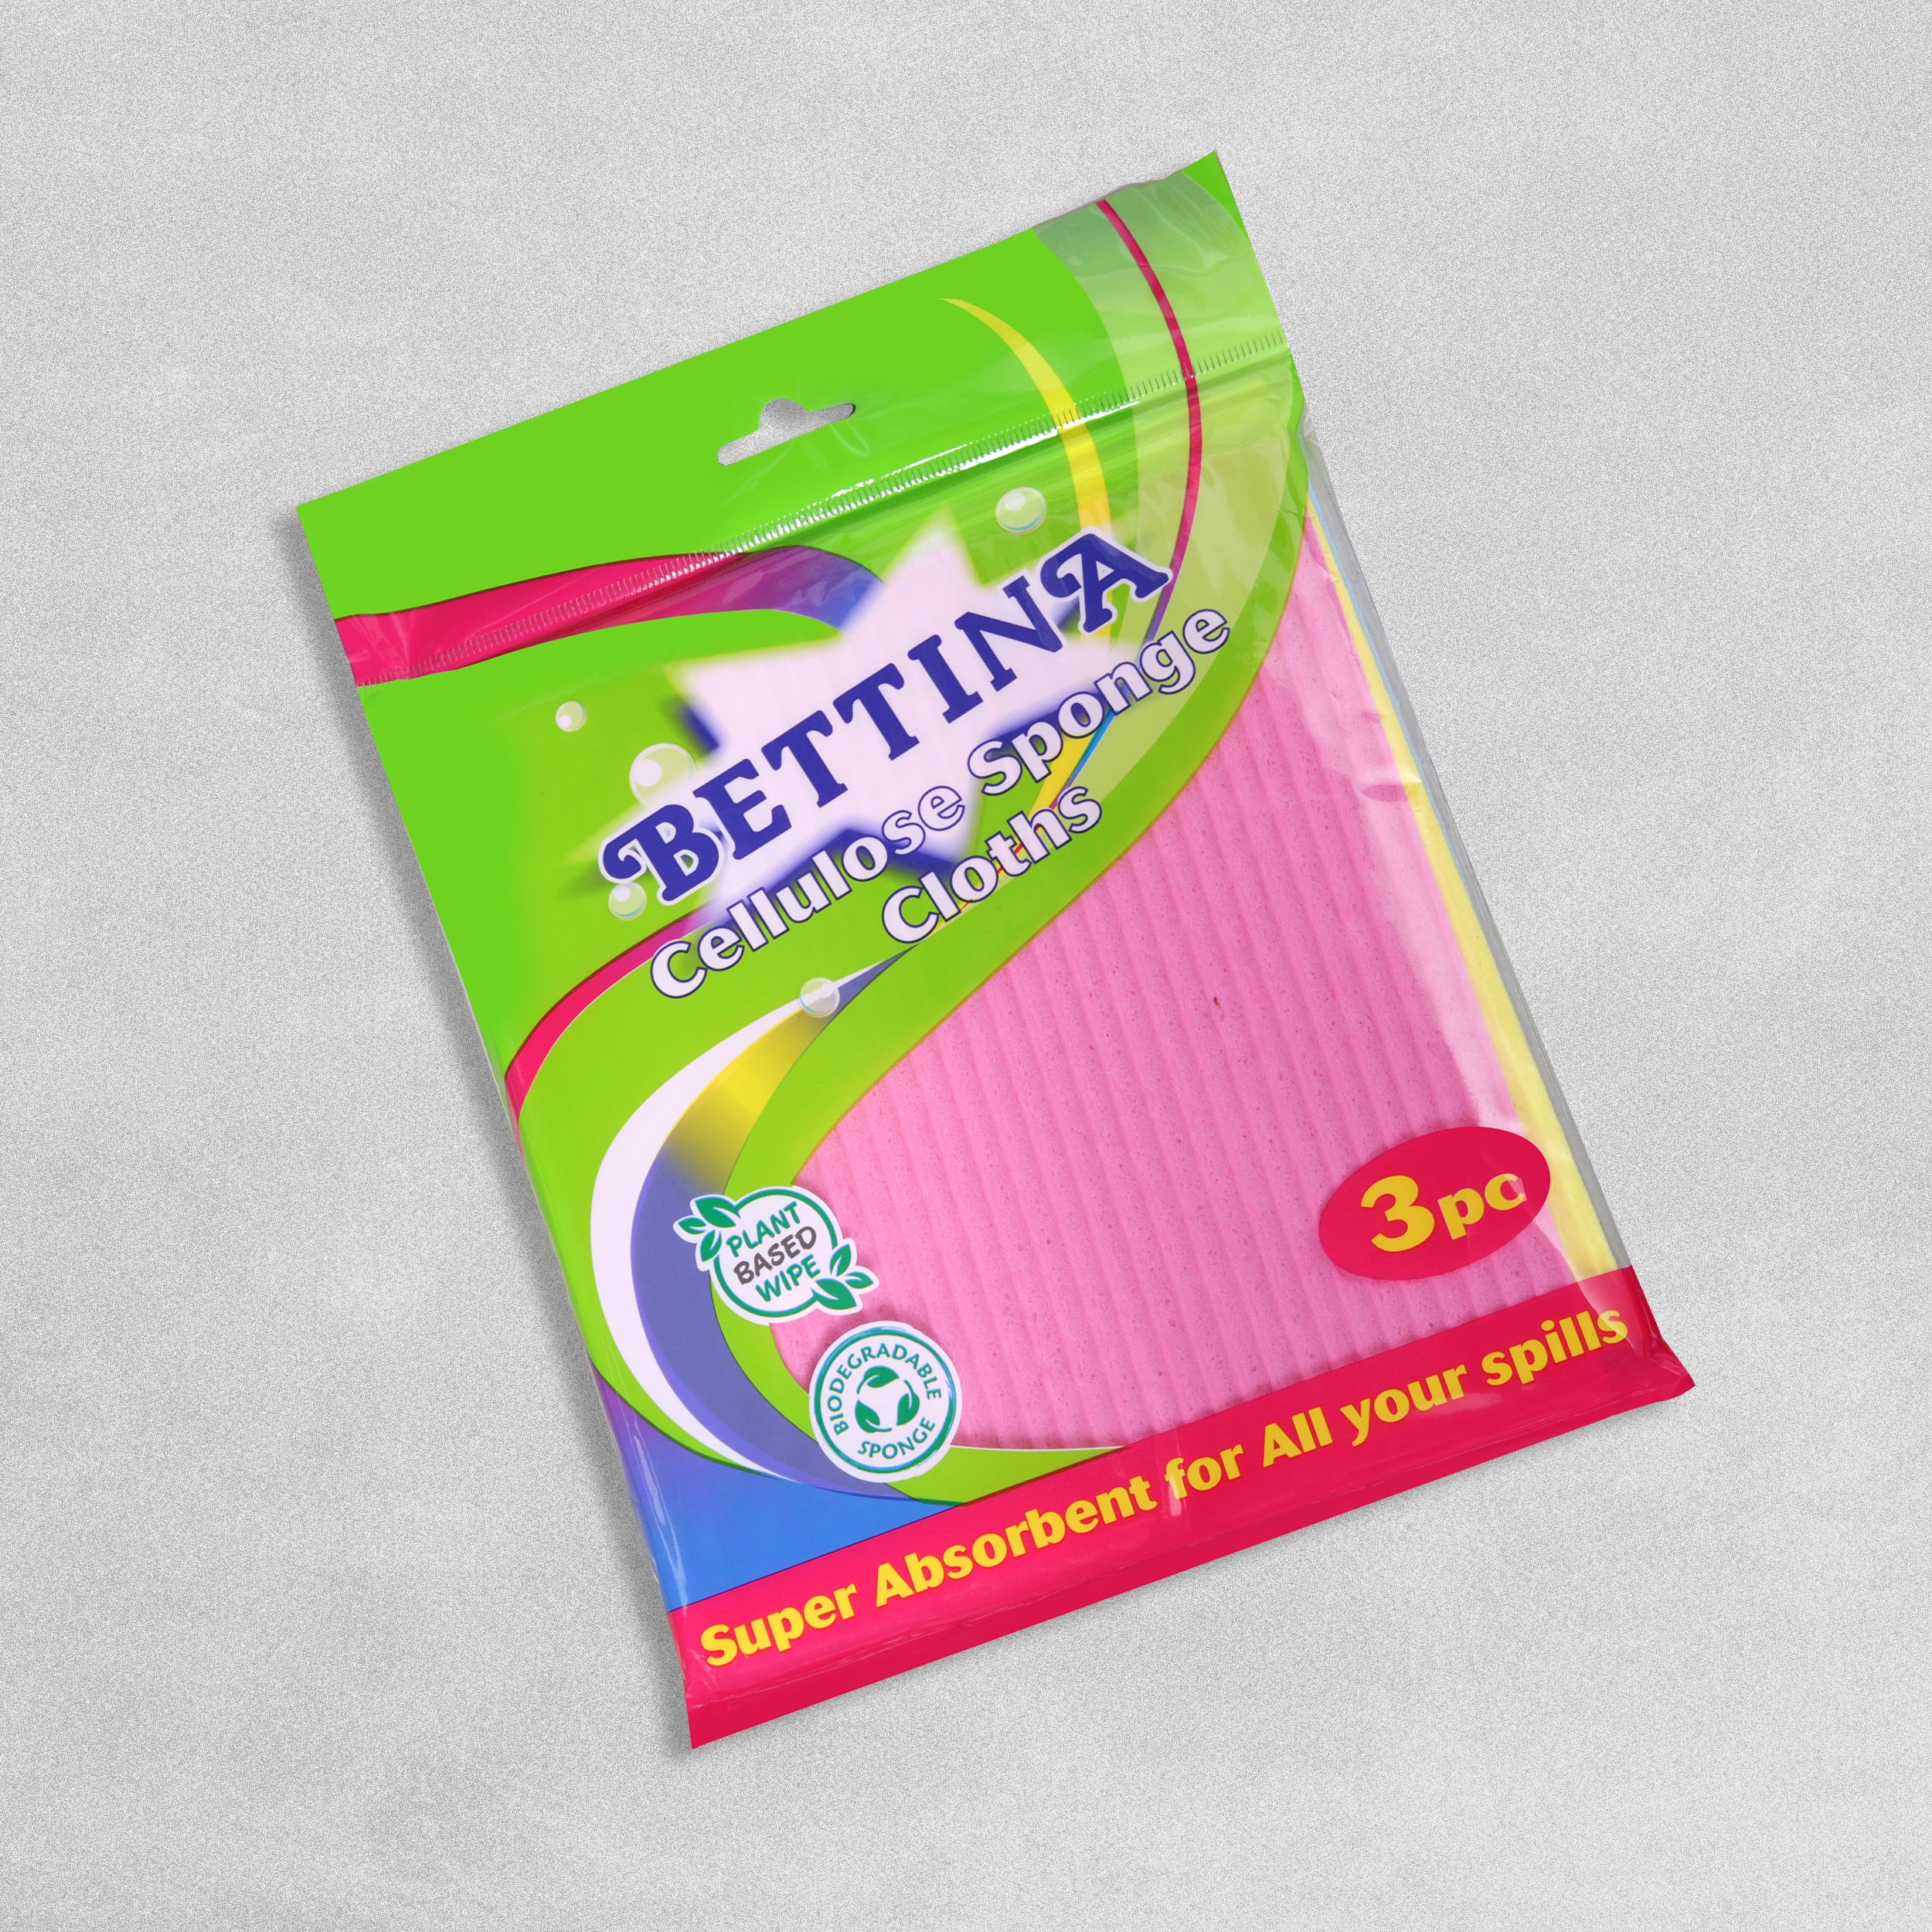 Bettina Cellulose Sponge Cloths - Pack of 3